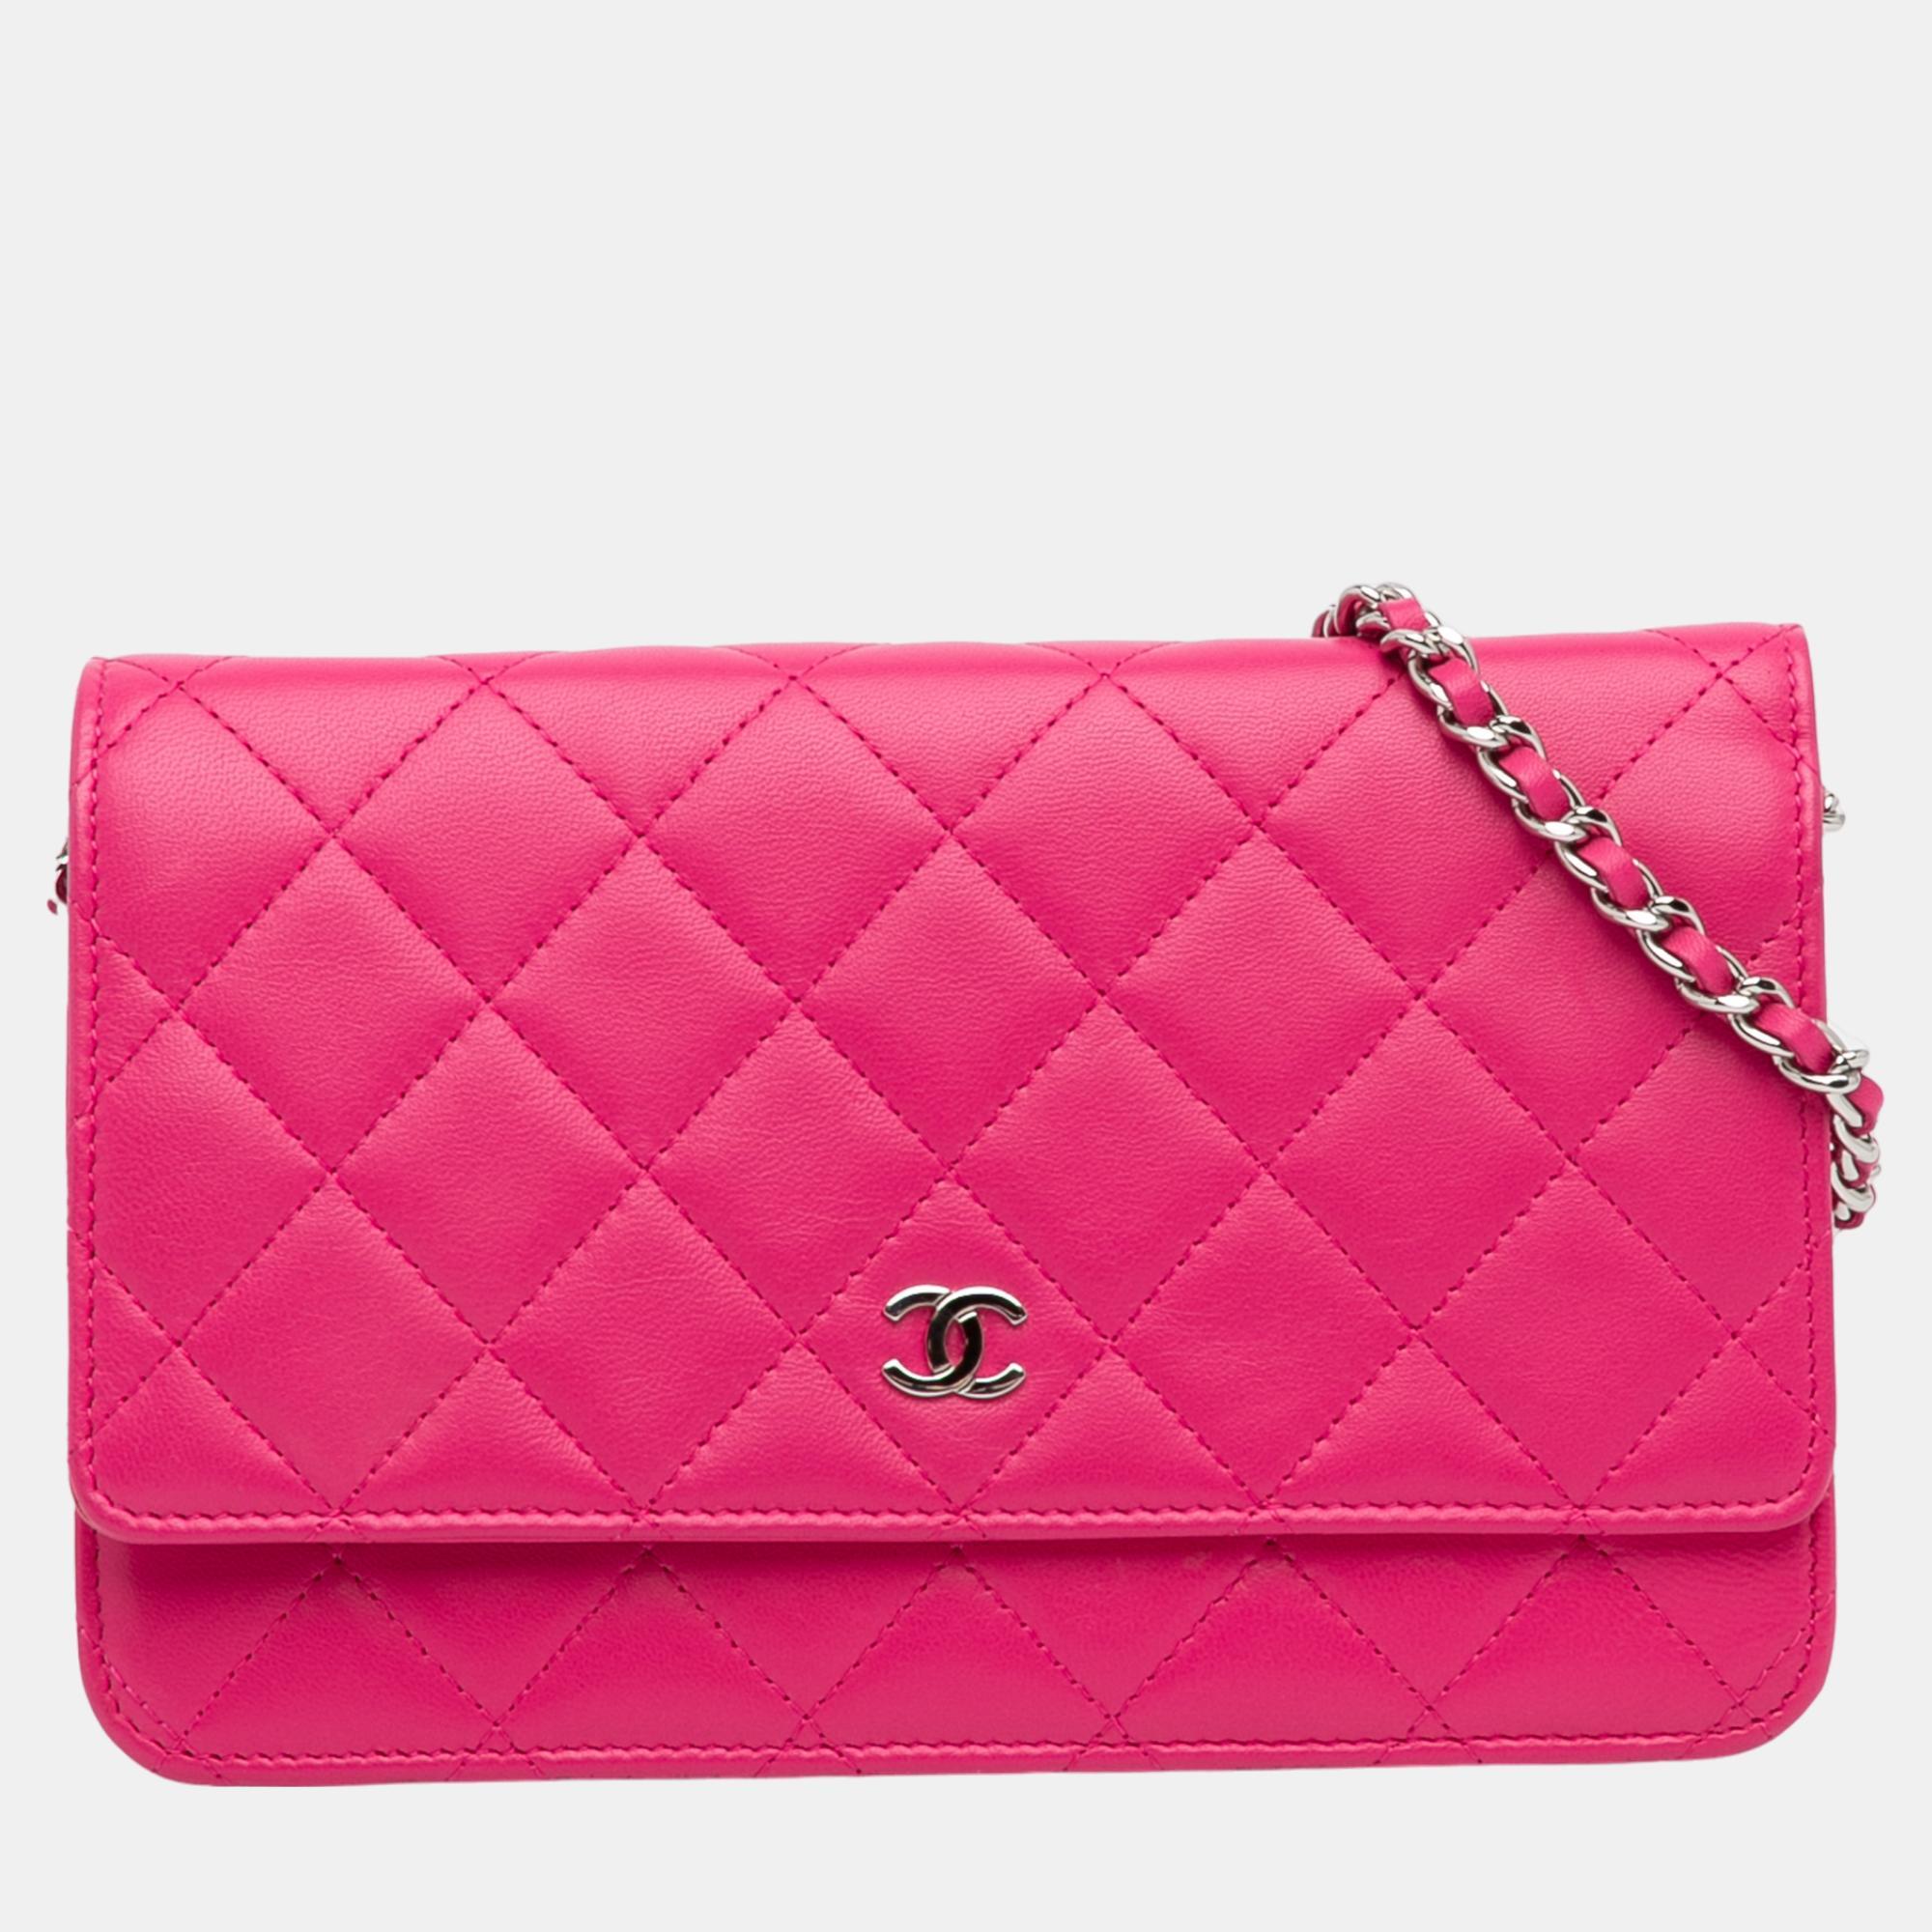 Chanel pink classic lambskin wallet on chain